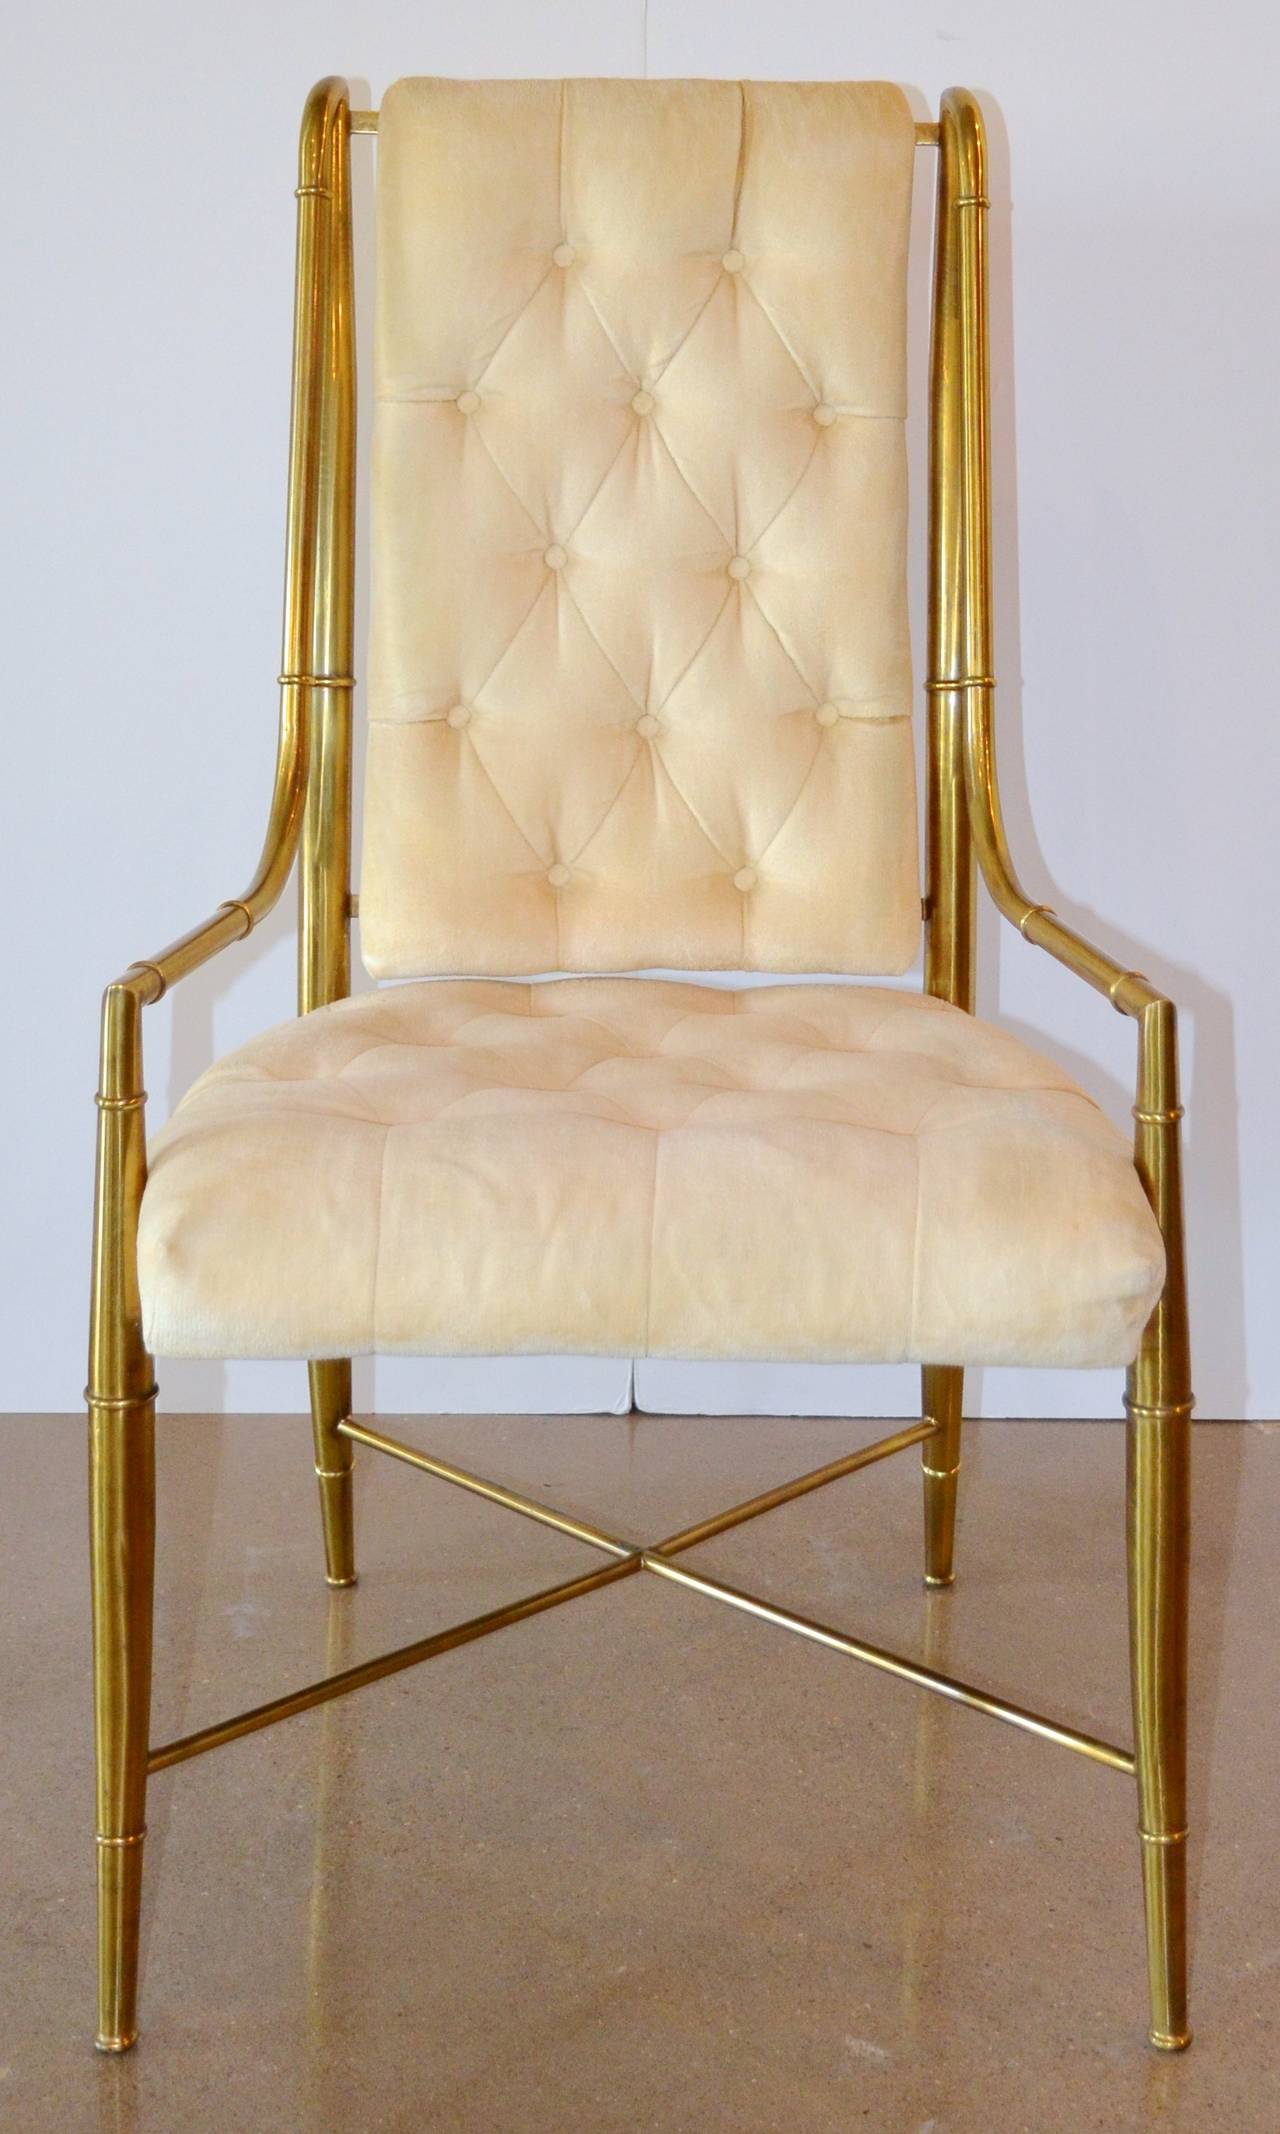 Highly sought after set of eight glamorous chairs from one of America's finest furniture makers. Classically styled heavy brass frames have been cleaned, but the desirable patina has been retained. Original upholstery is ready to be customized.